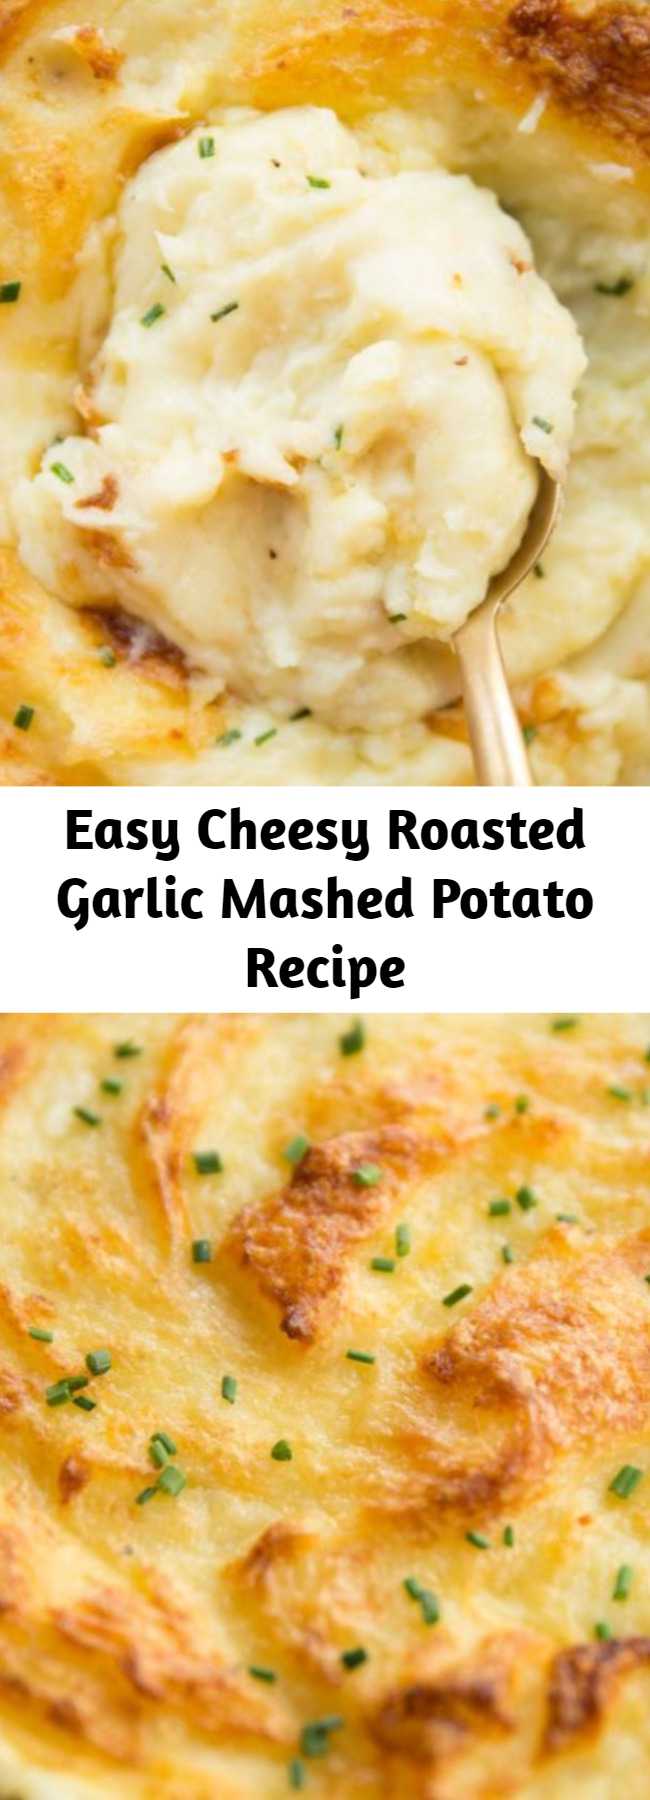 Easy Cheesy Roasted Garlic Mashed Potato Recipe - This Roasted Garlic Mashed Potato is loaded with Butter, Cream and Cheese, then baked in the oven until ultra crisp on top and gooey underneath. #cheese #cheesy #potato #mashedpotatoes #roastedgarlic #garlicpotatoes